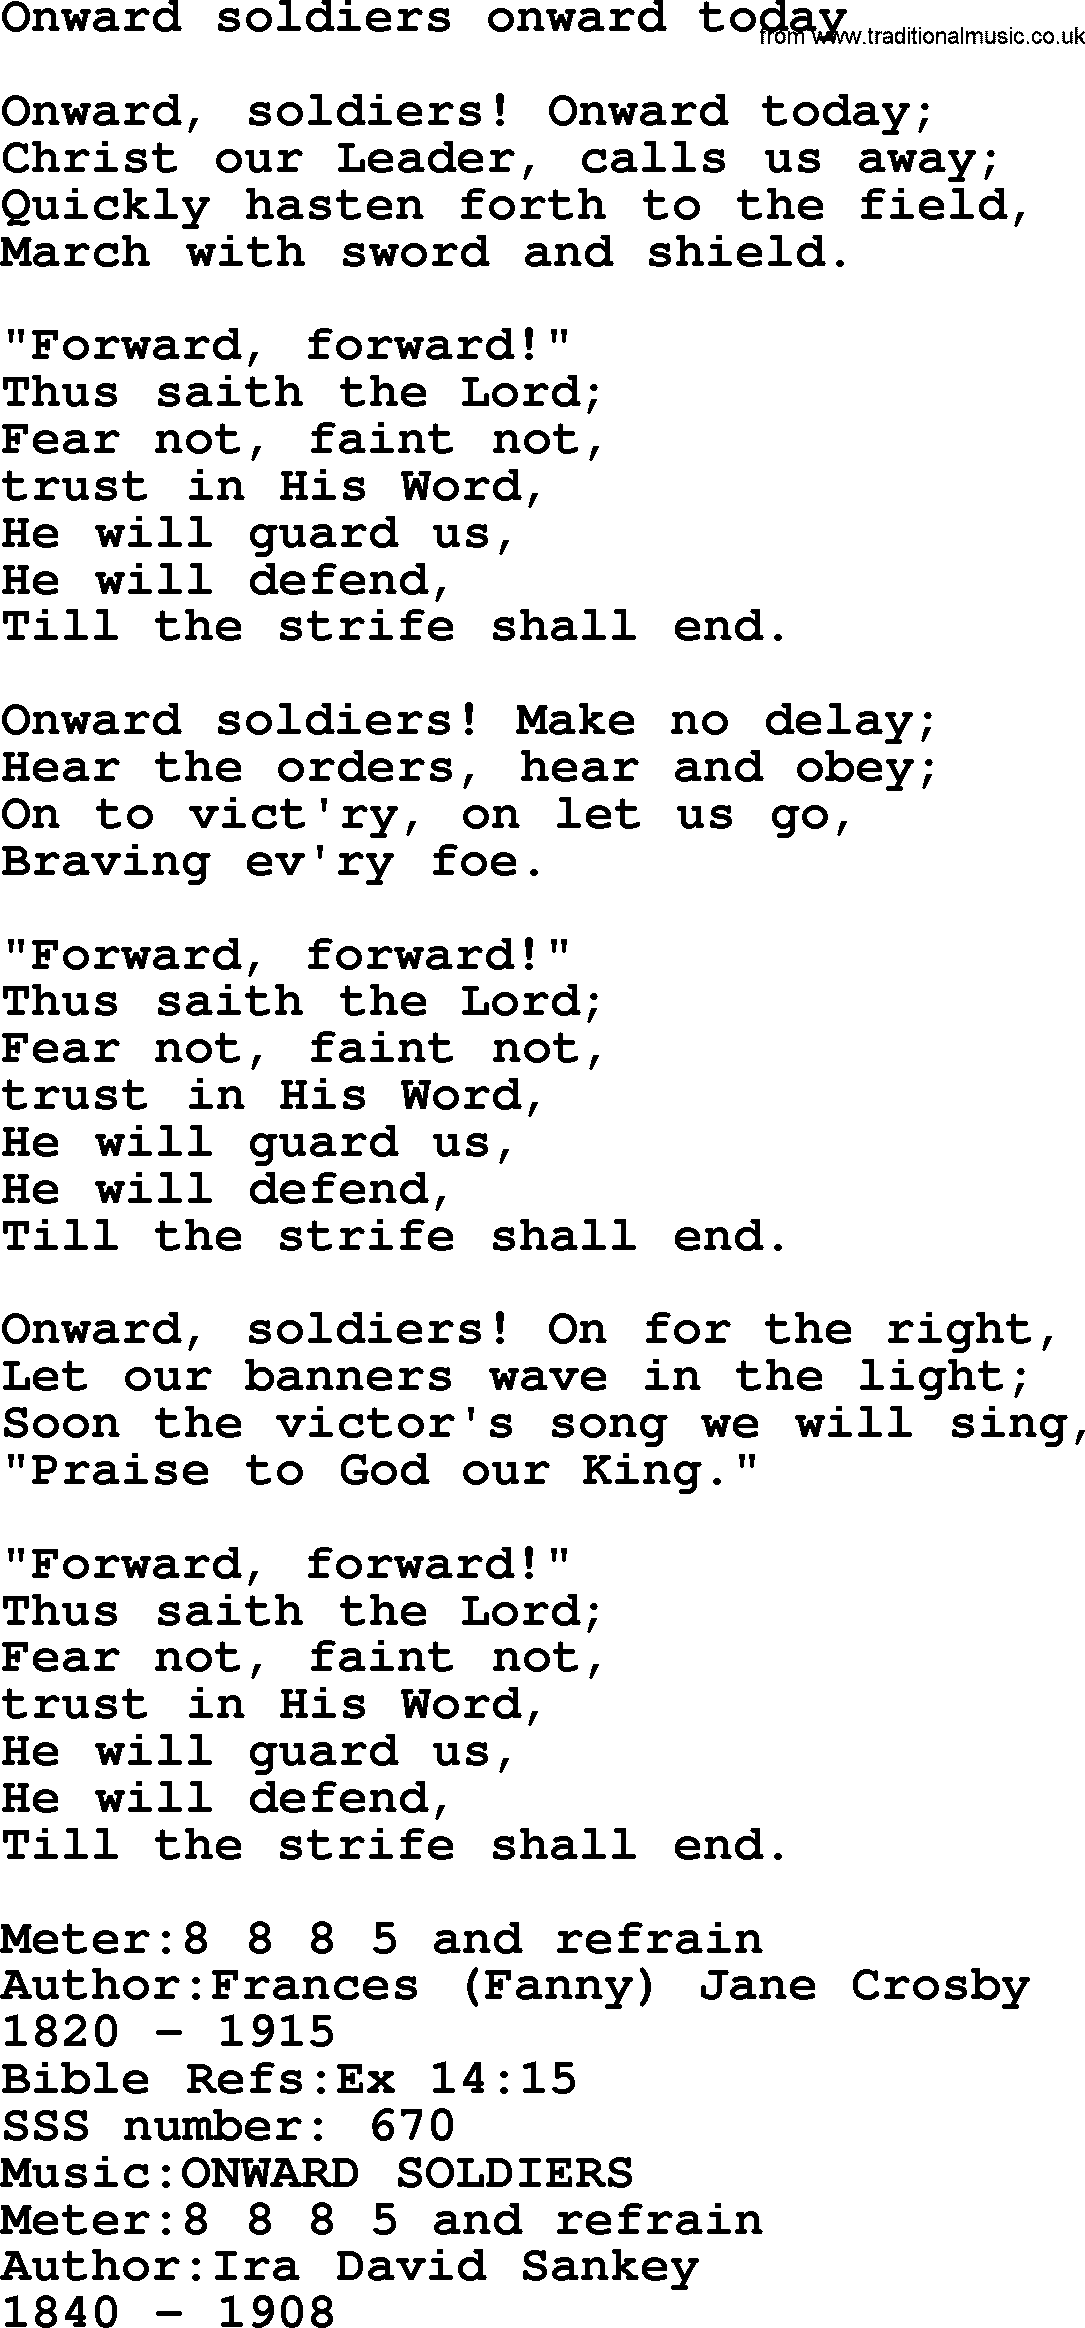 Sacred Songs and Solos complete, 1200 Hymns, title: Onward Soldiers Onward Today, lyrics and PDF